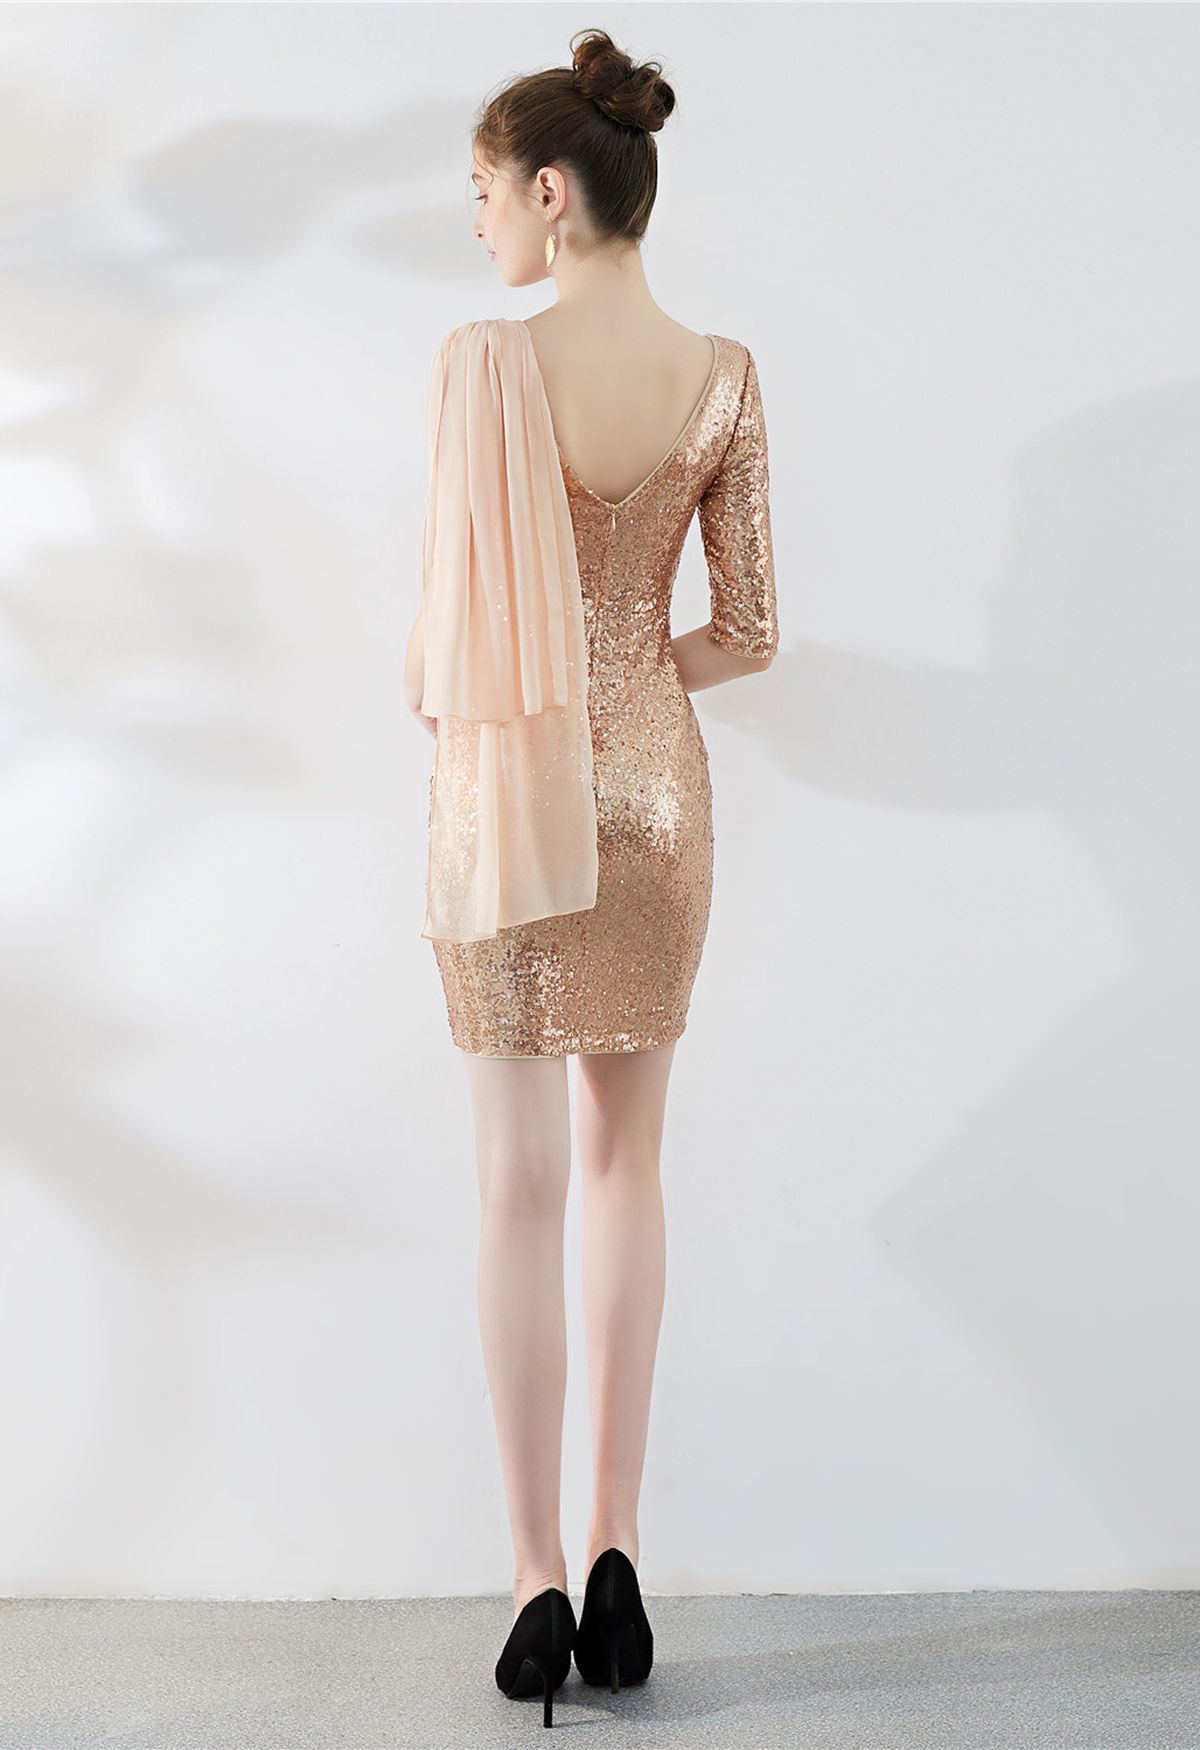 V-Neck Chiffon Spliced Sequined Cocktail Dress in Gold